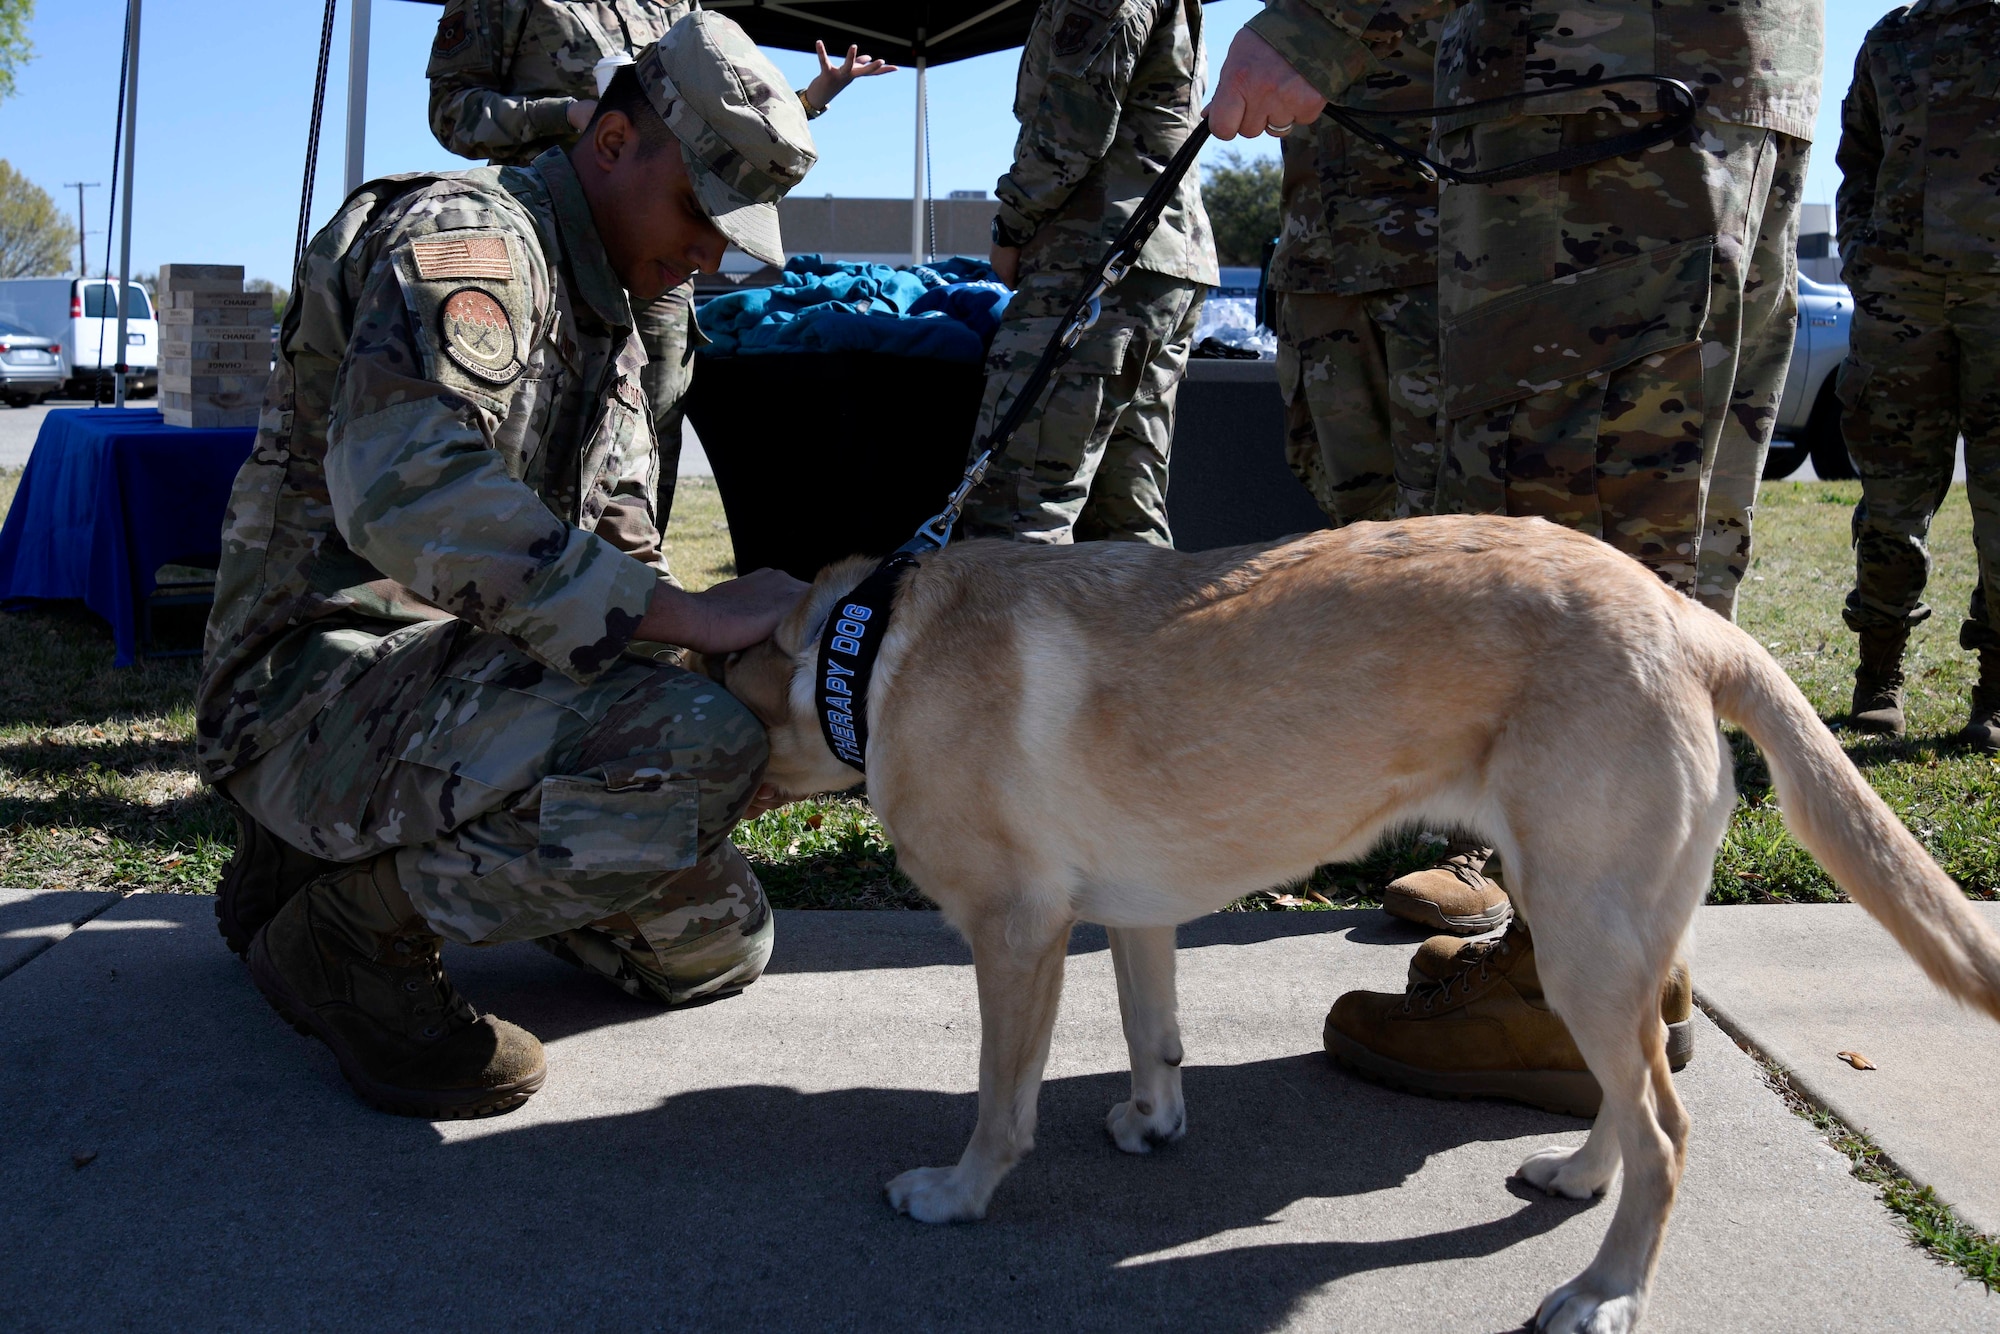 Senior Airman Dhruv Singh, 301 st Fighter Wing Religious Affairs Airman pets

Dallas, 301 FW therapy dog, during the Sexual Assault Prevention and Response meet and greet at Naval Air Station Joint Reserve Base Fort Worth, Texas, April 2, 2022. The 301 FW Helping Agencies team acquired Dallas to promote stress relief.